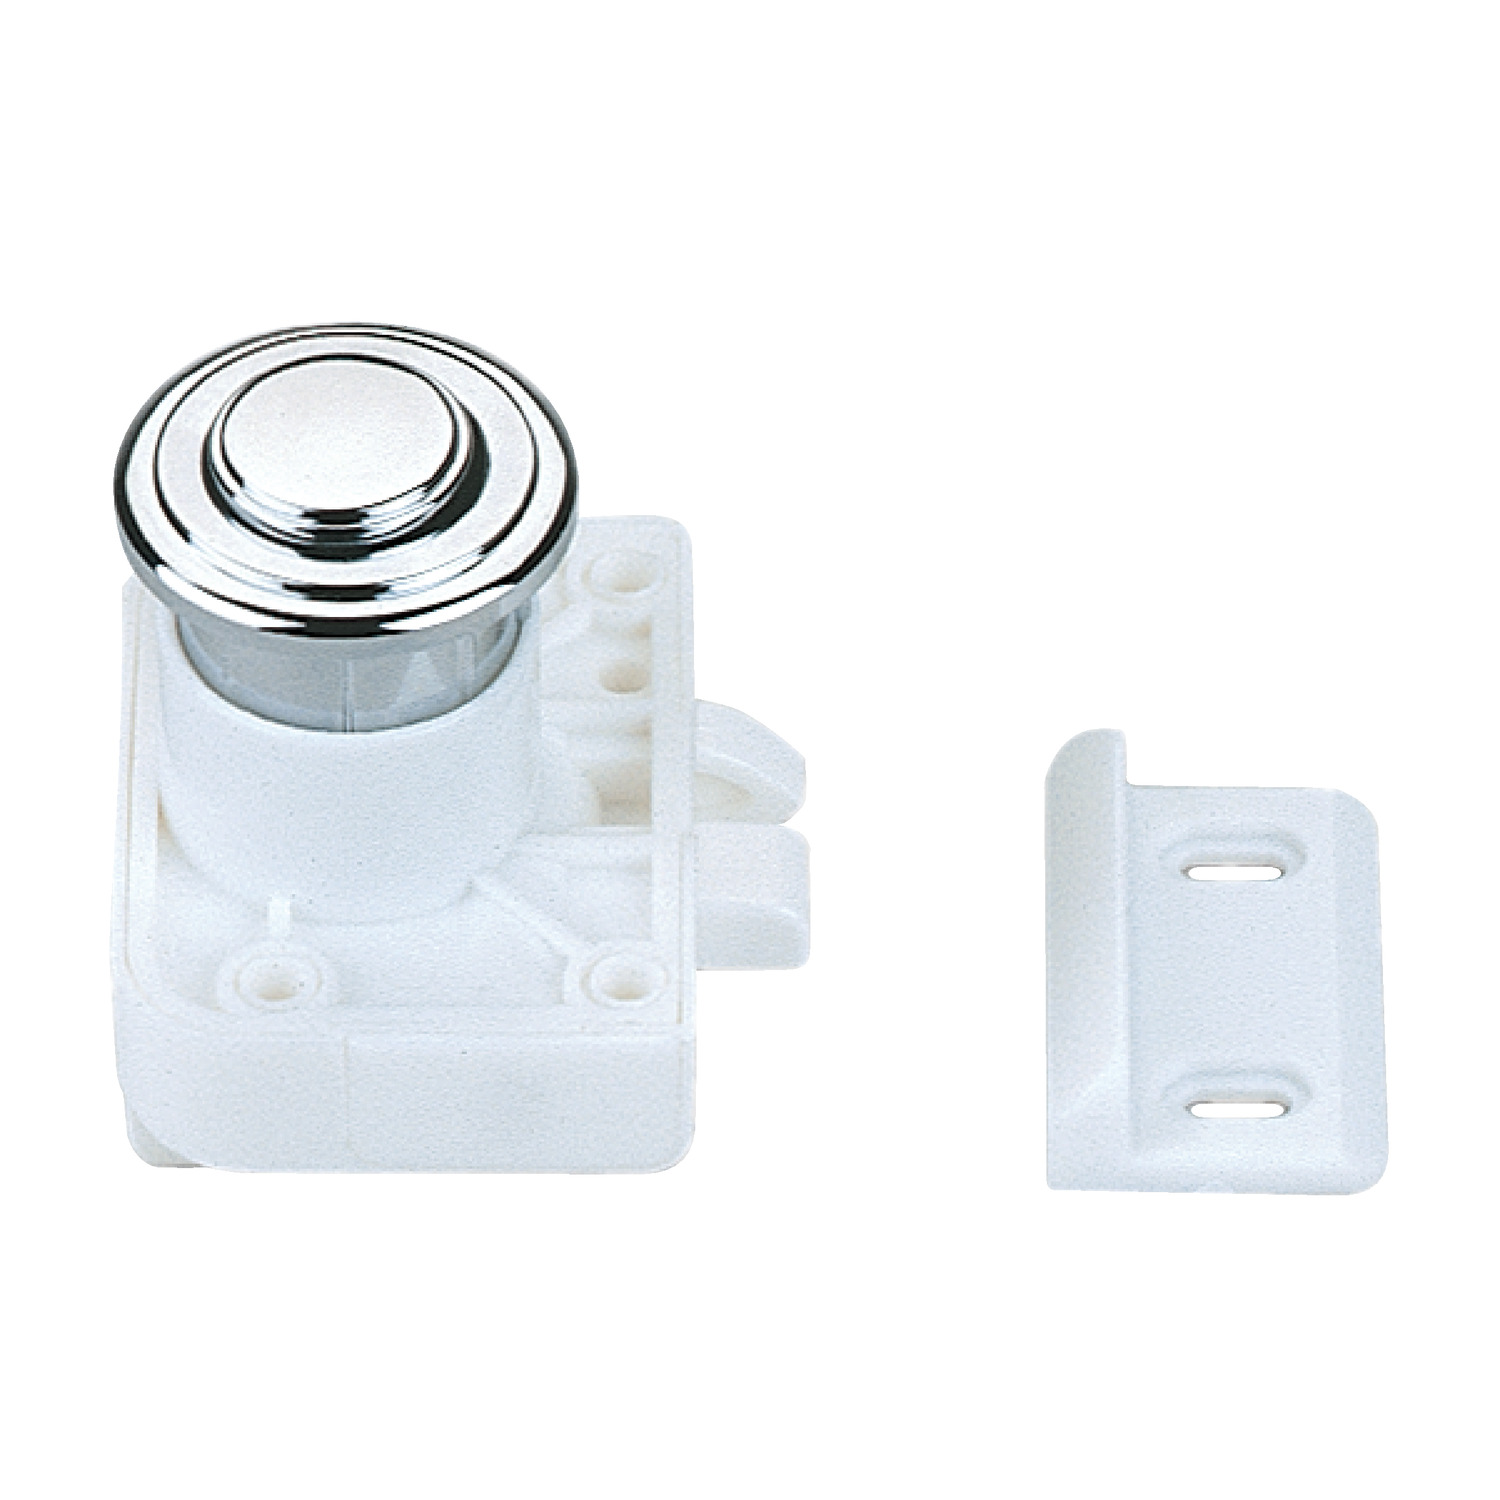 E1400.AC0040 Push Knobs Chrome finish - with latch - for overlay doors